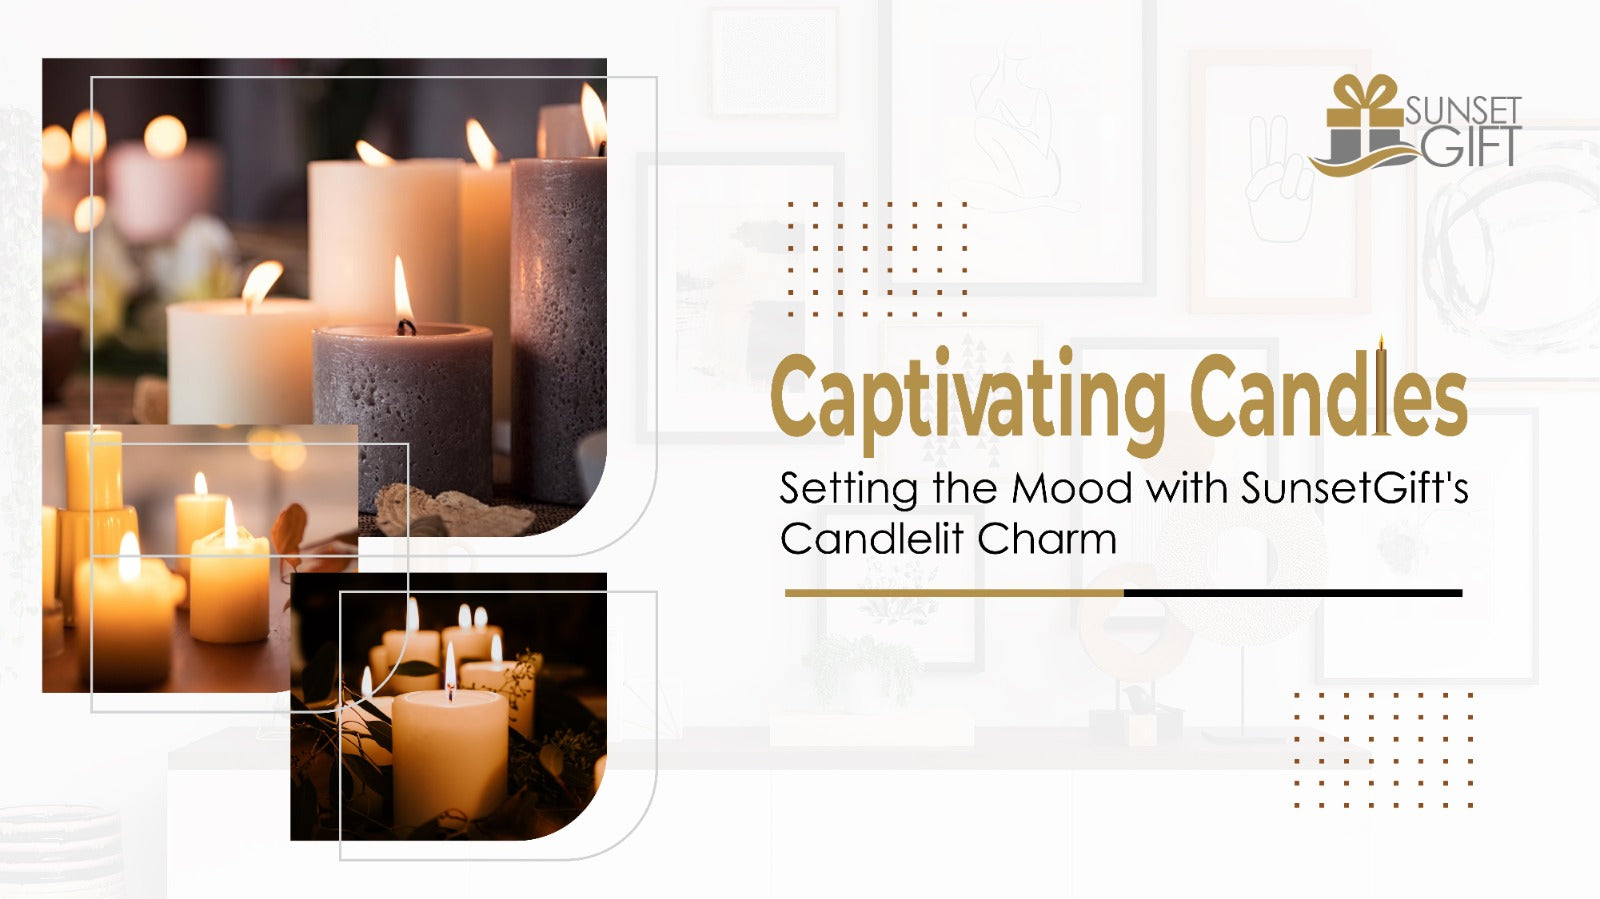 Captivating Candles: Setting the Mood with SunsetGift's Candlelit Charm - Sunset Gifts Store